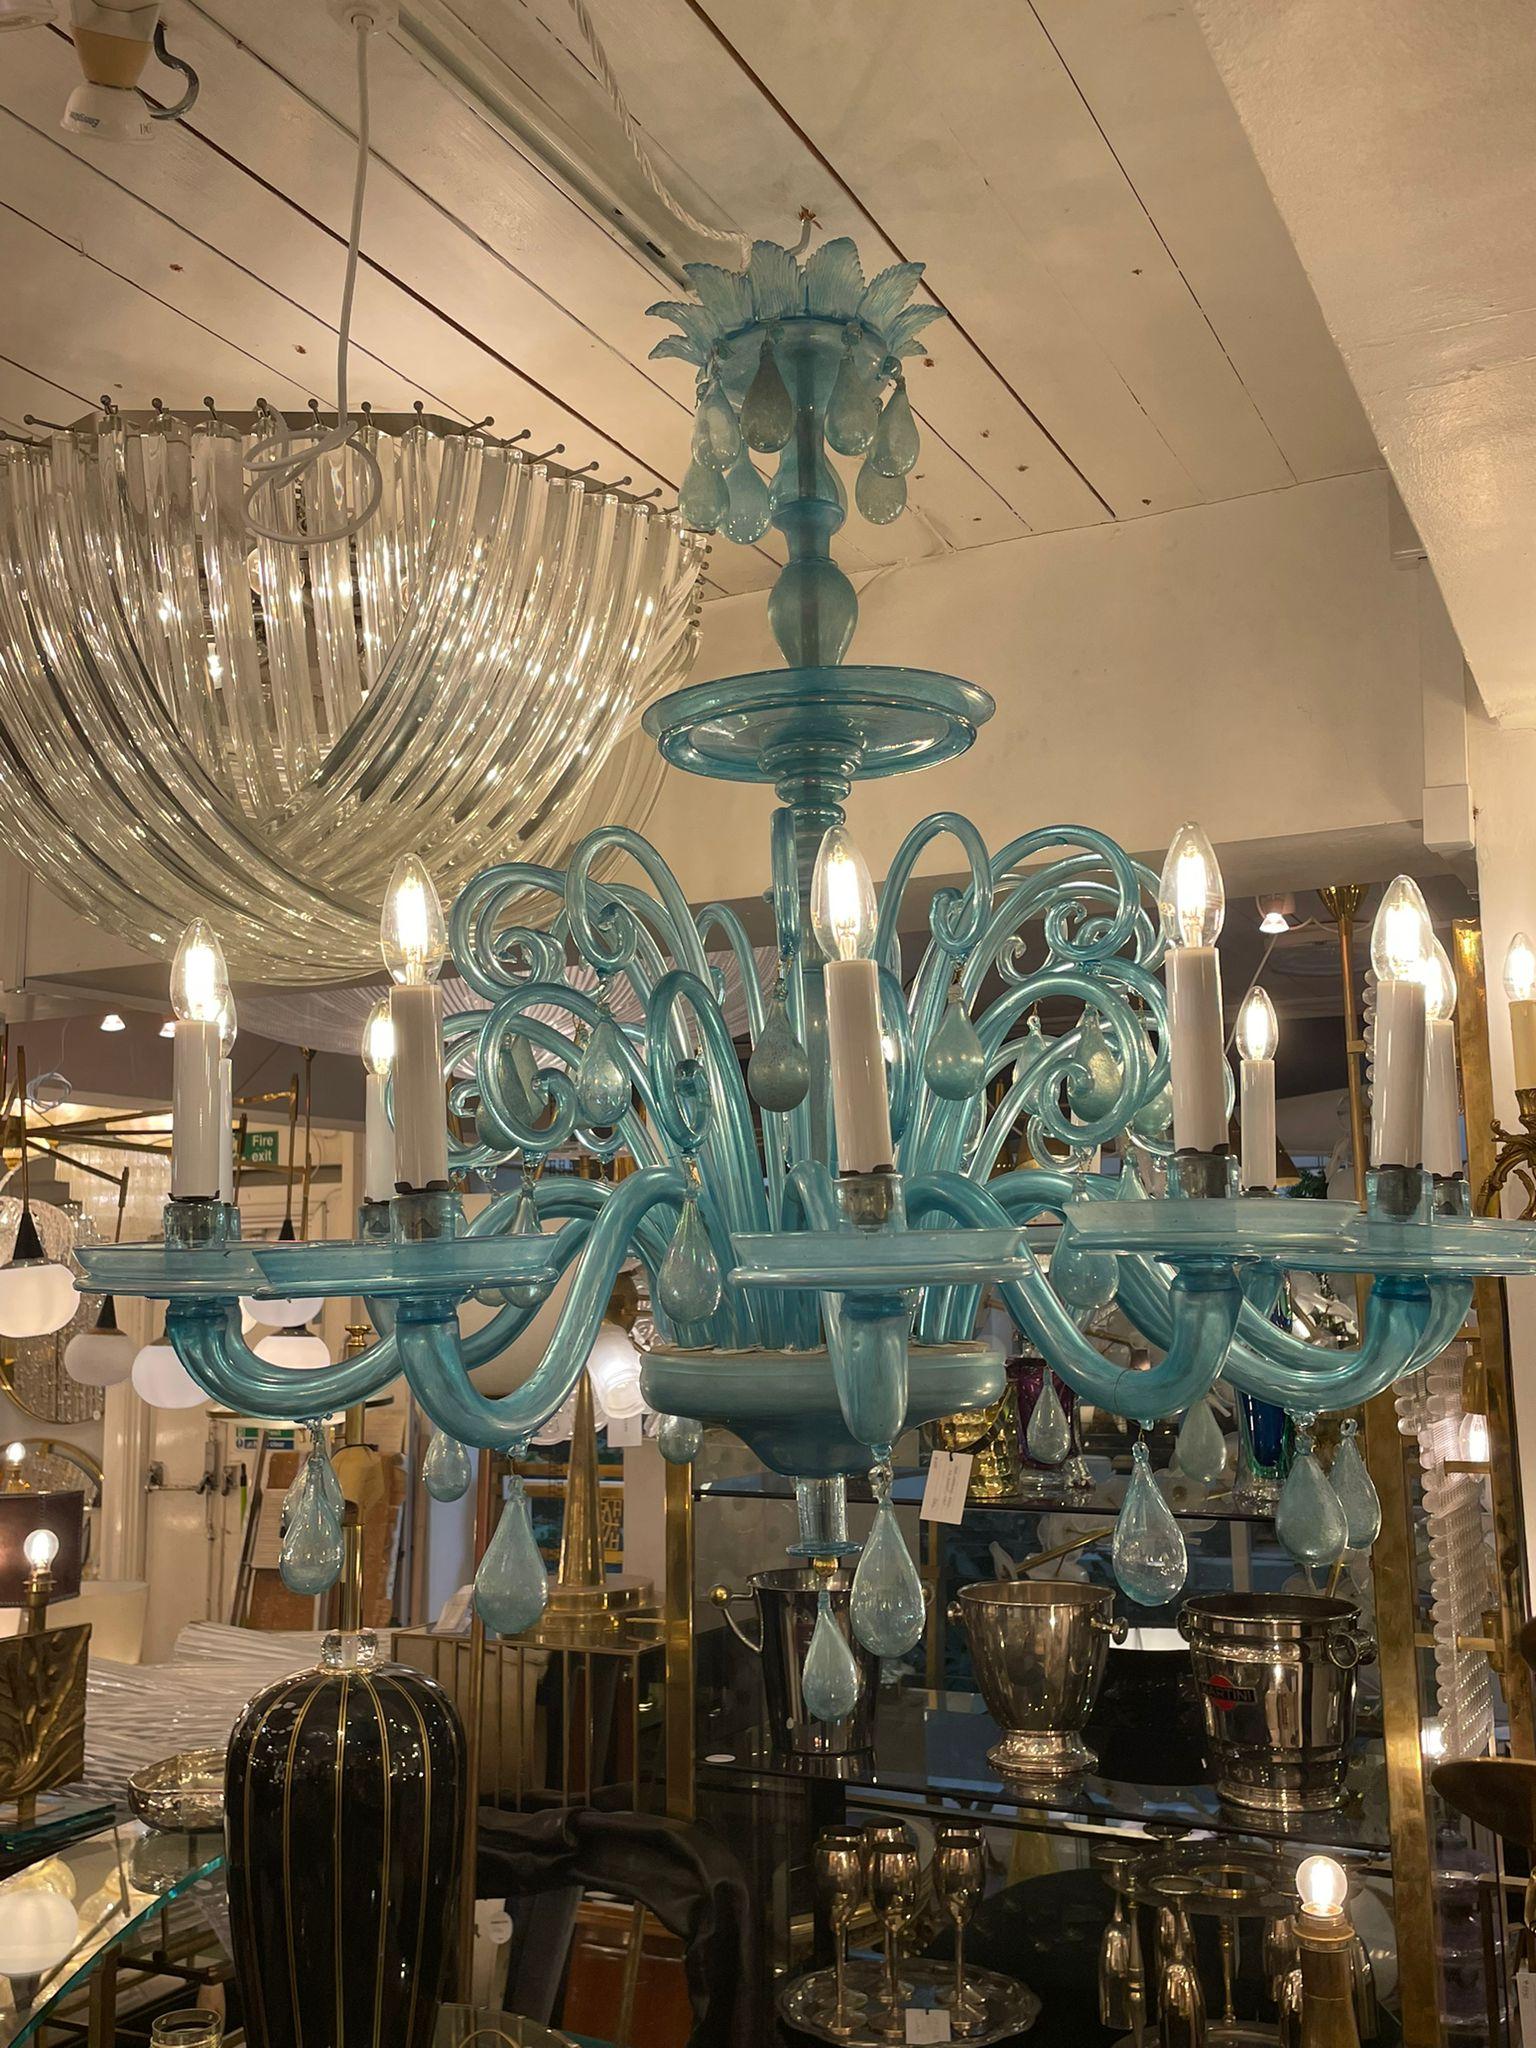 This fantastic turquoise chandelier in Murano glass is an outstanding and rare museum piece of art attributed to M.V.M. Cappellin, circa 1920s. It is a magnificent chandelier entirely hand crafted from hand blown Murano glass that will elegantly